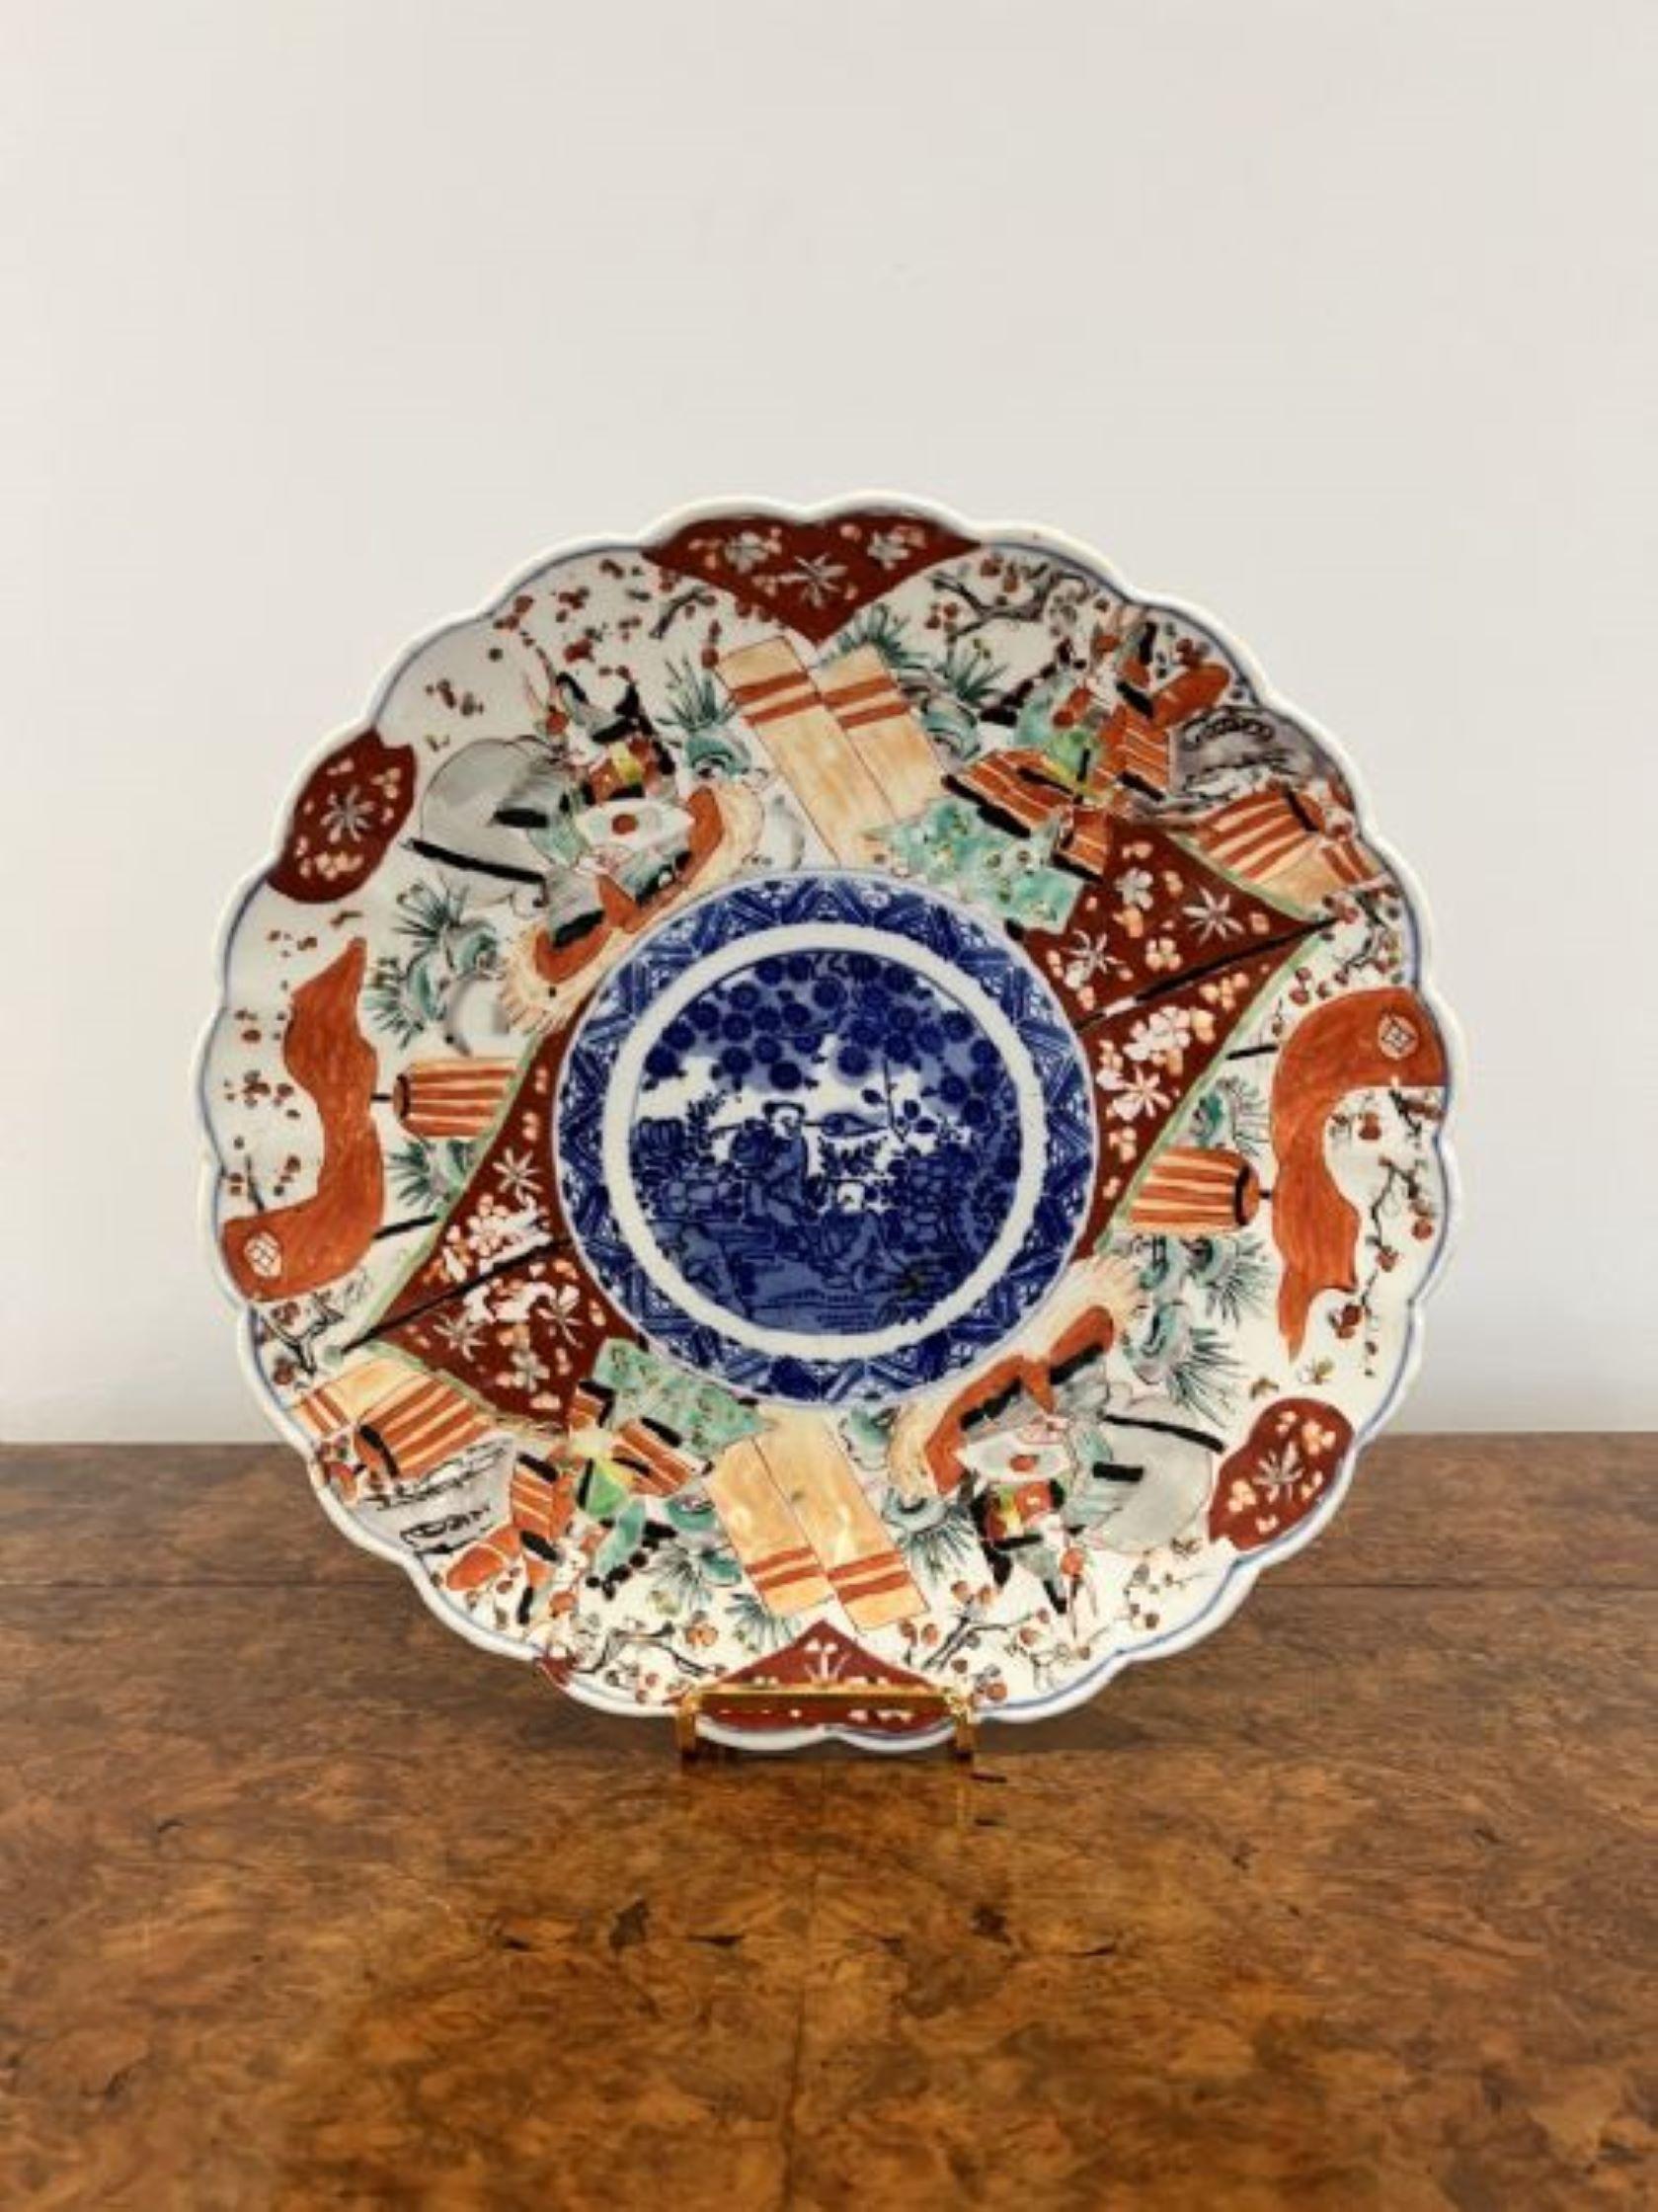 Quality antique Japanese imari plate having a quality antique imari plate with a scalloped shaped edge with hand painted panels with flowers, leaves, trees and people in vibrant red, blue, green, white and black colours, to the centre a hand painted